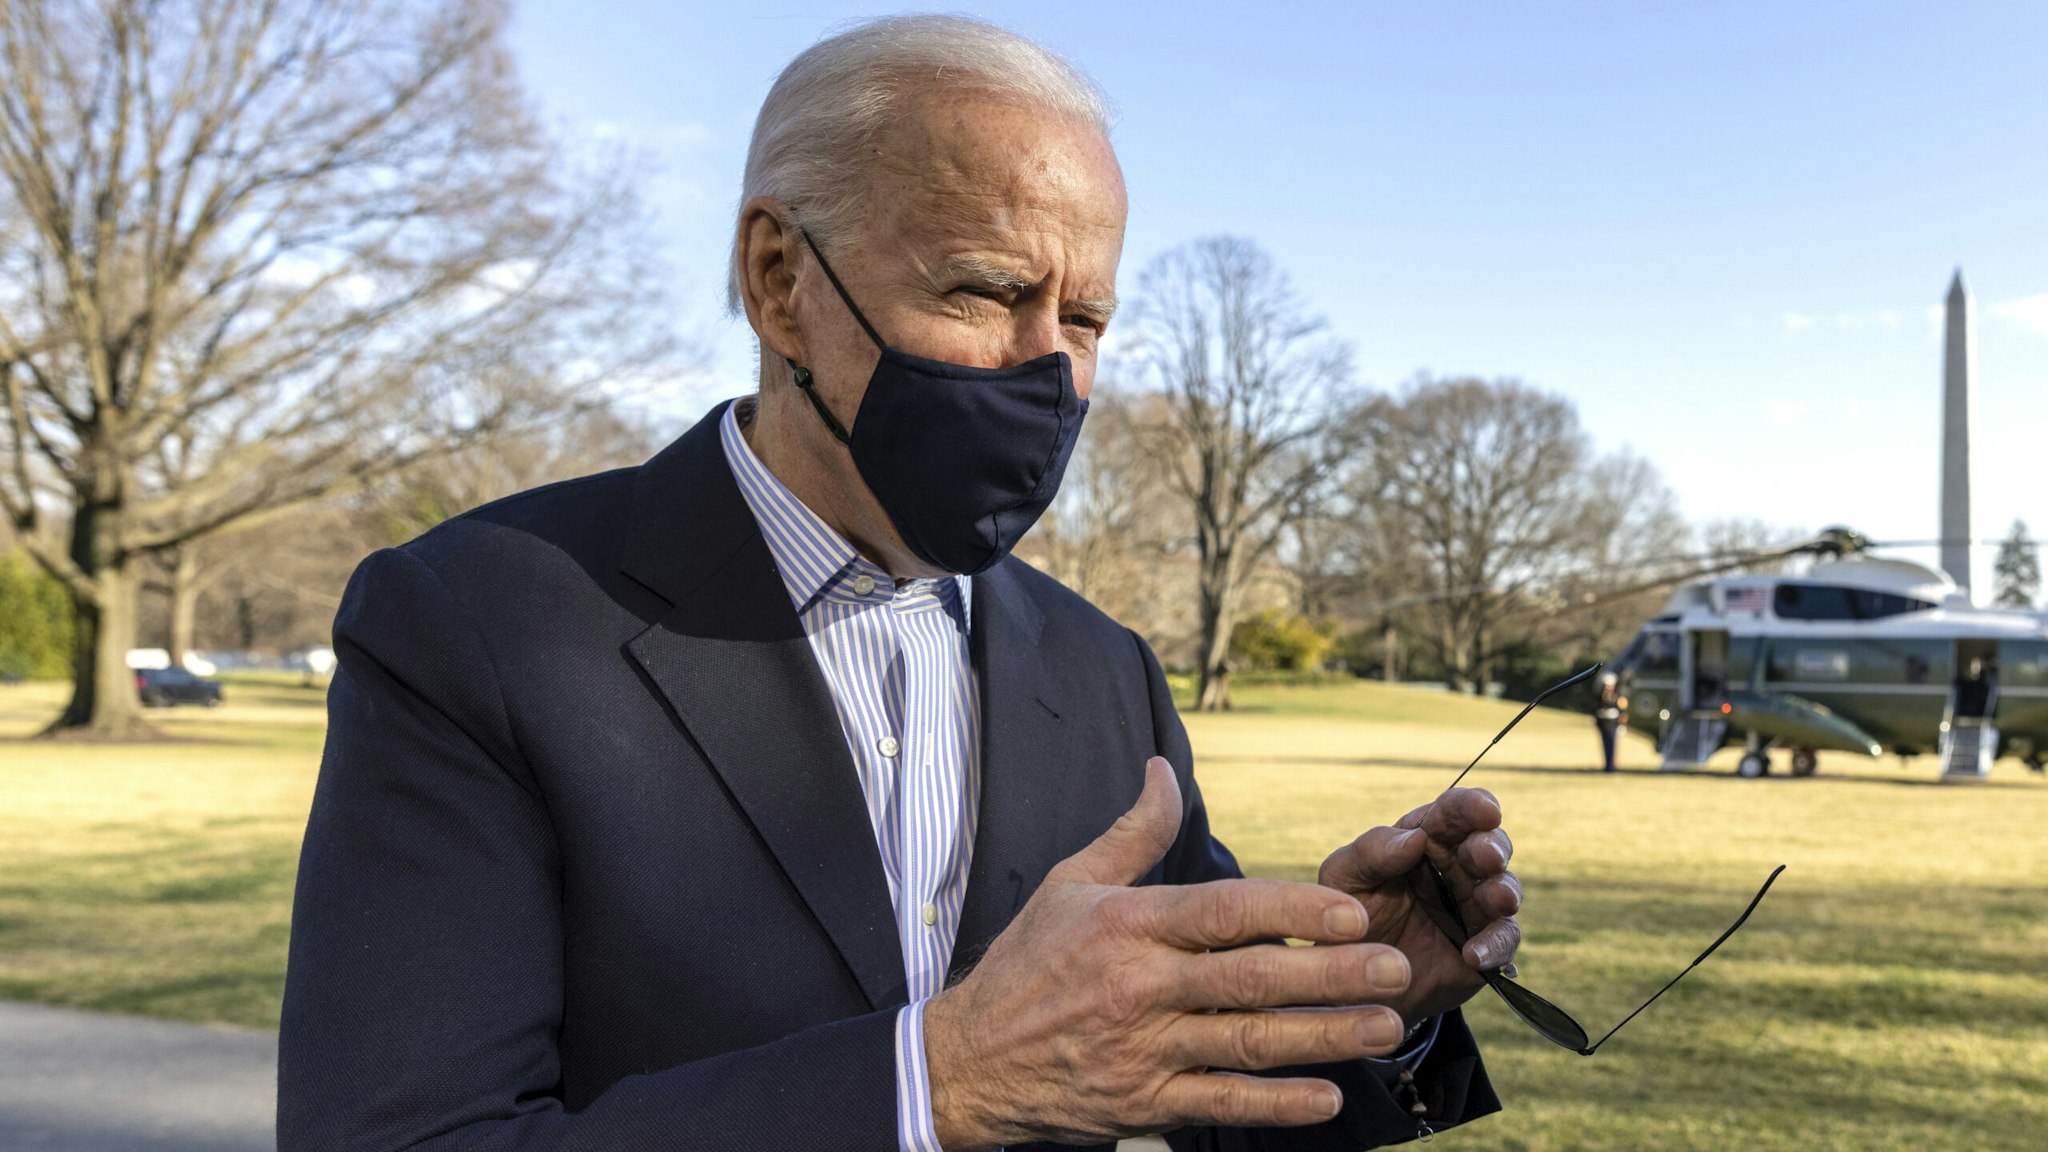 WASHINGTON, DC - MARCH 21: U.S. President Joe Biden stops to talk to reporters on the South Lawn of the White House on March 21, 2021 in Washington, DC. The President and first lady spent the weekend at Camp David with family.